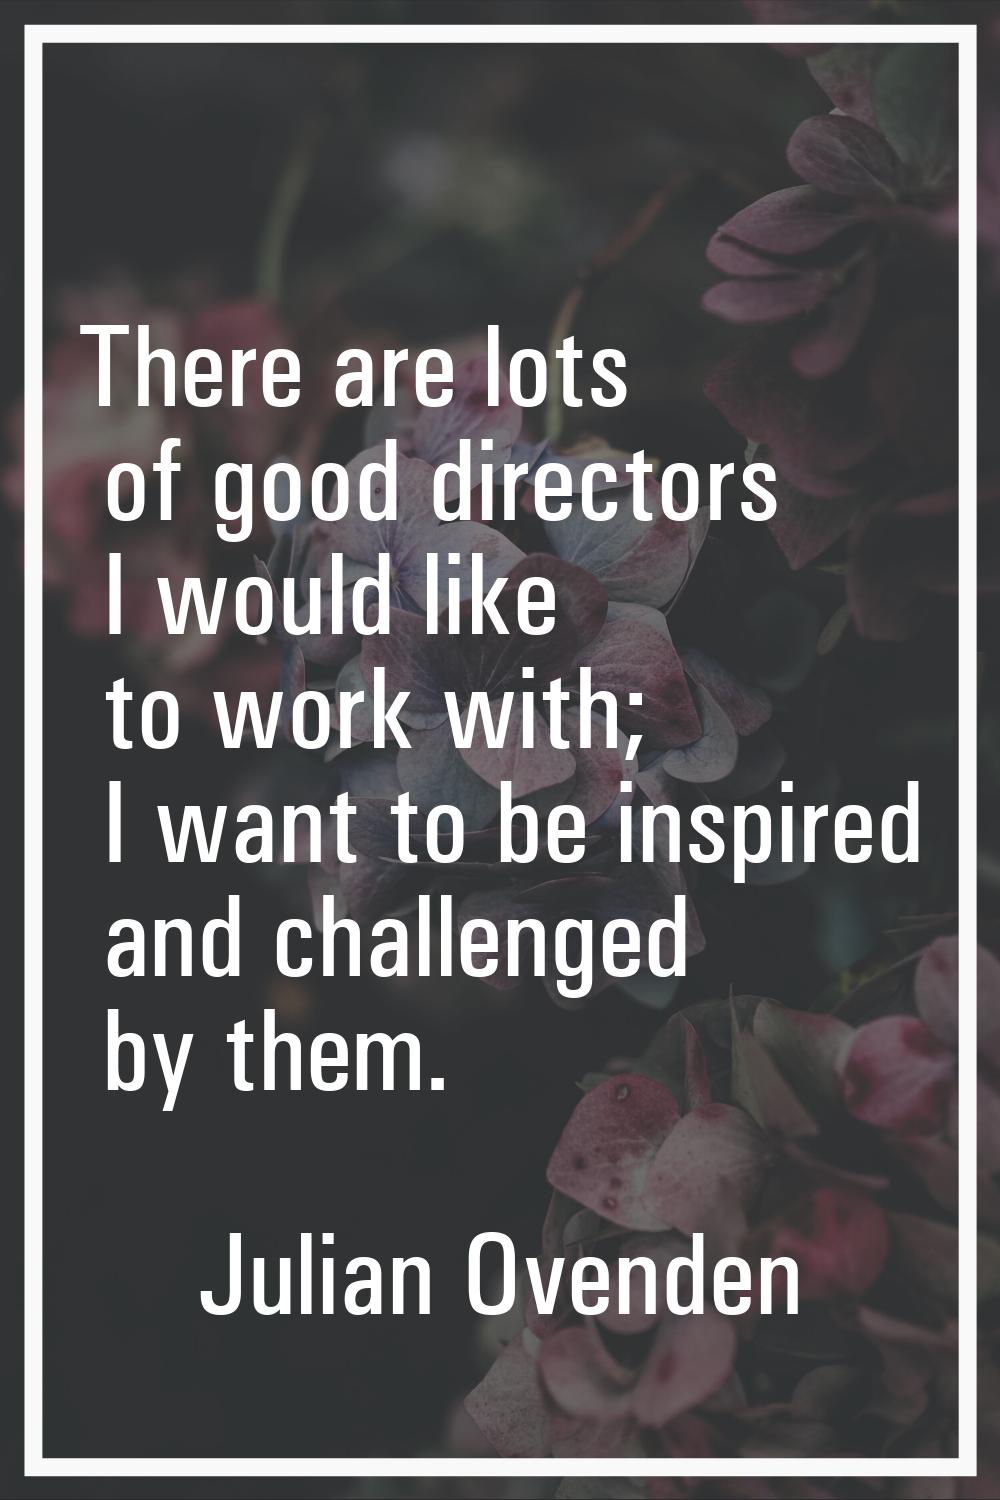 There are lots of good directors I would like to work with; I want to be inspired and challenged by